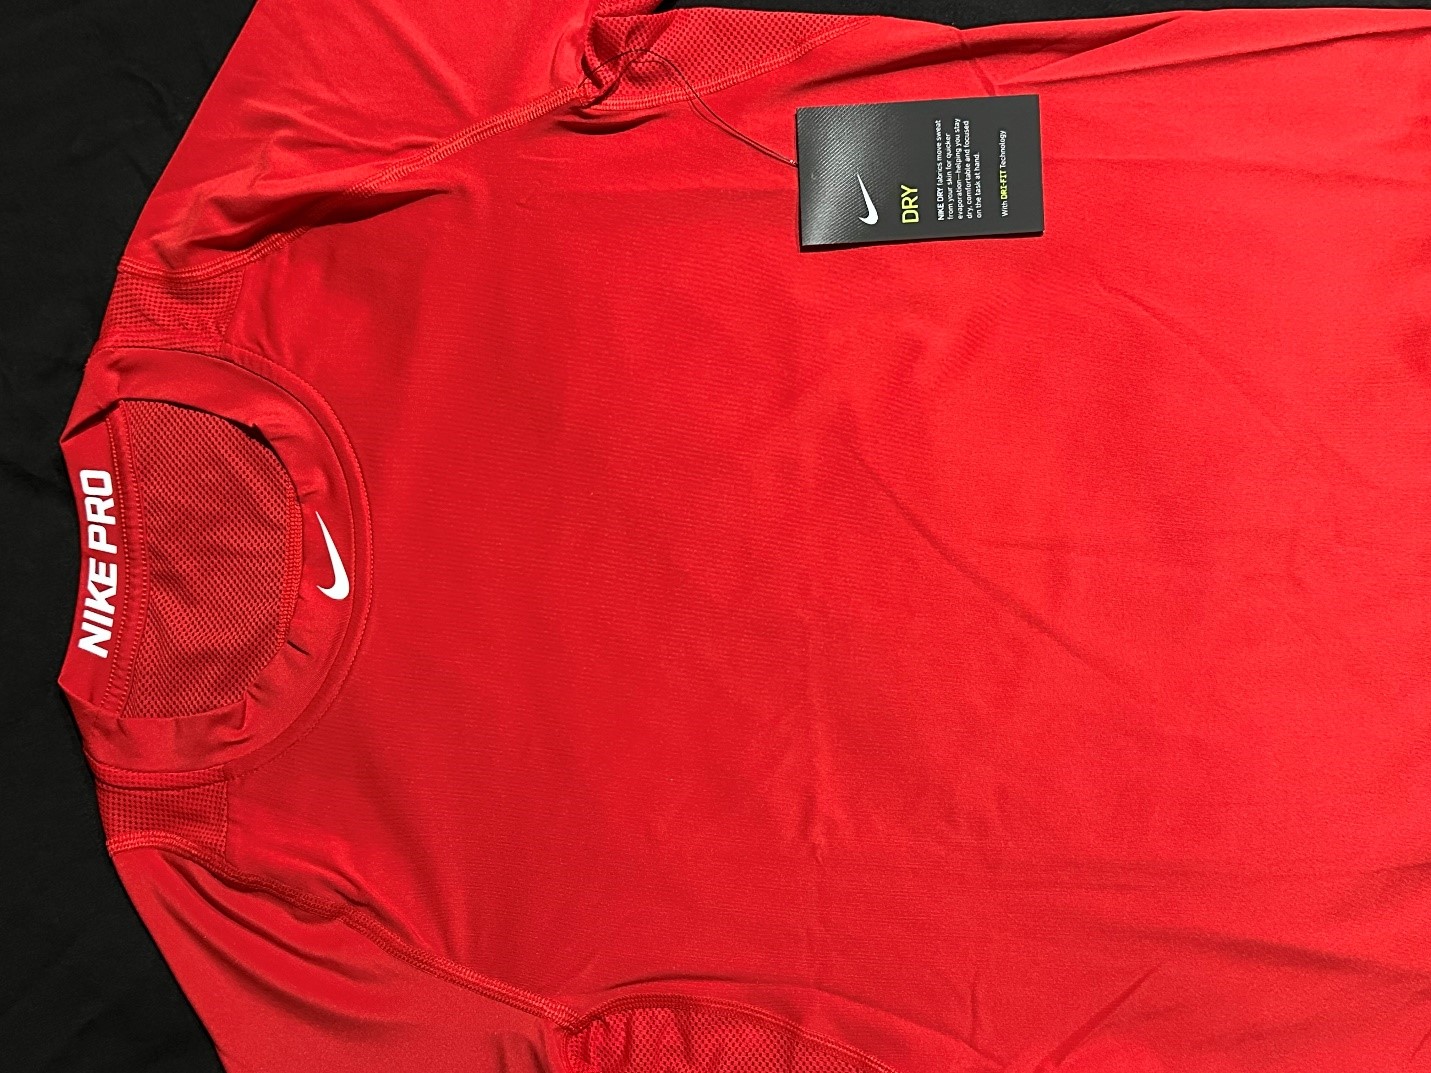 3/4 Sleeve Red Compression Shirt